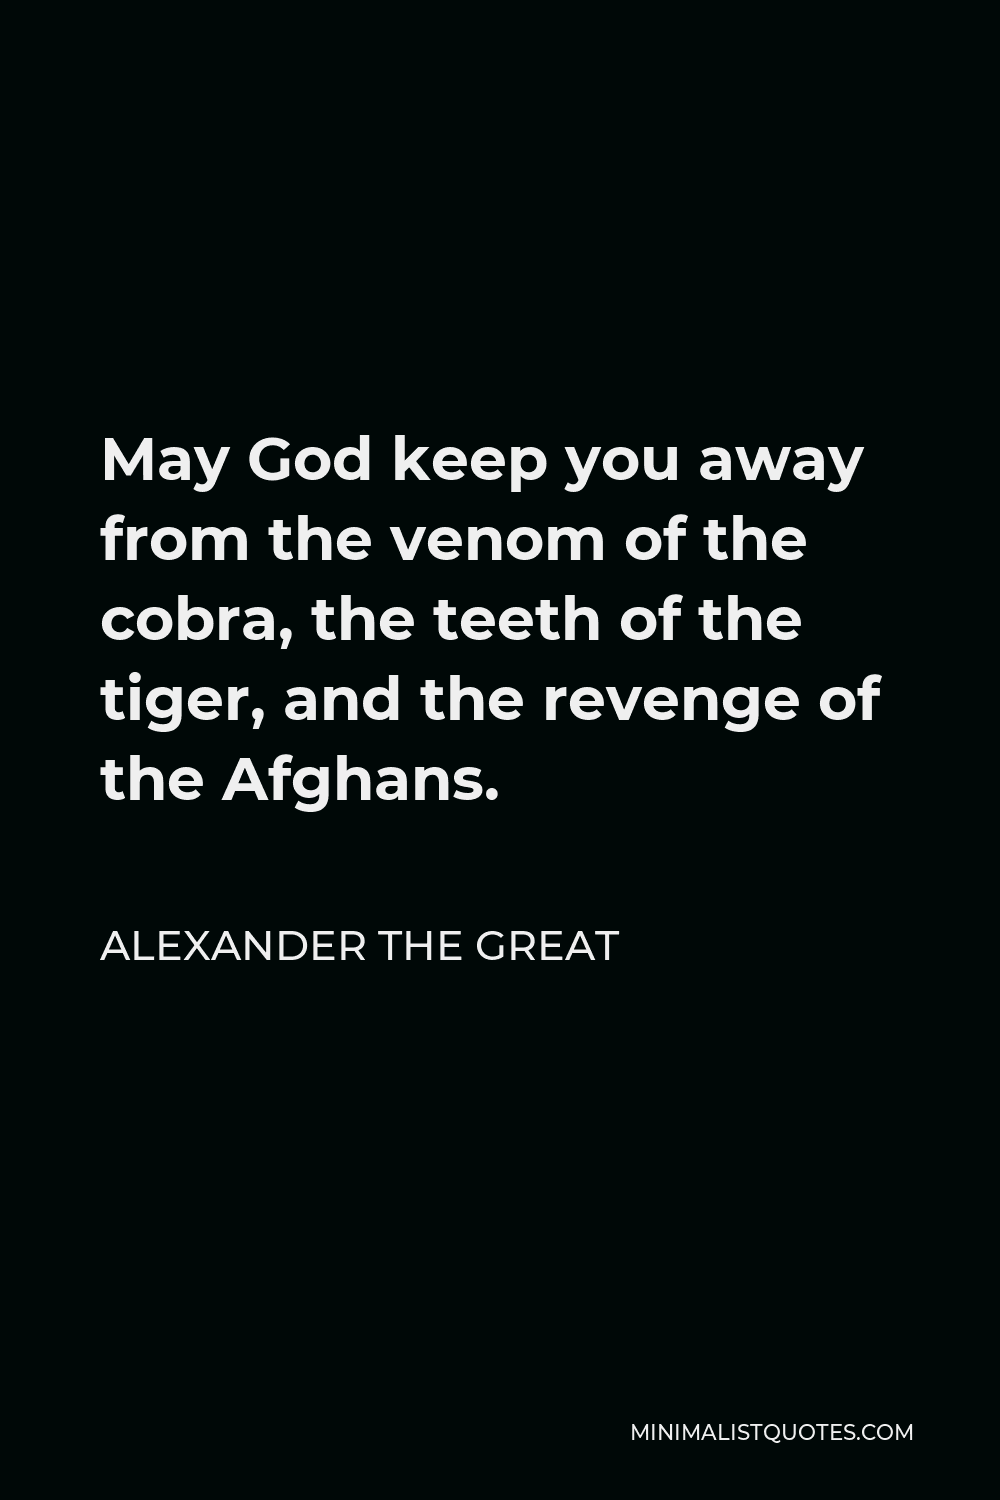 Alexander The Great Quote: May God Keep You Away From The Venom Of The Cobra, The Teeth Of The Tiger, And The Revenge Of The Afghans.